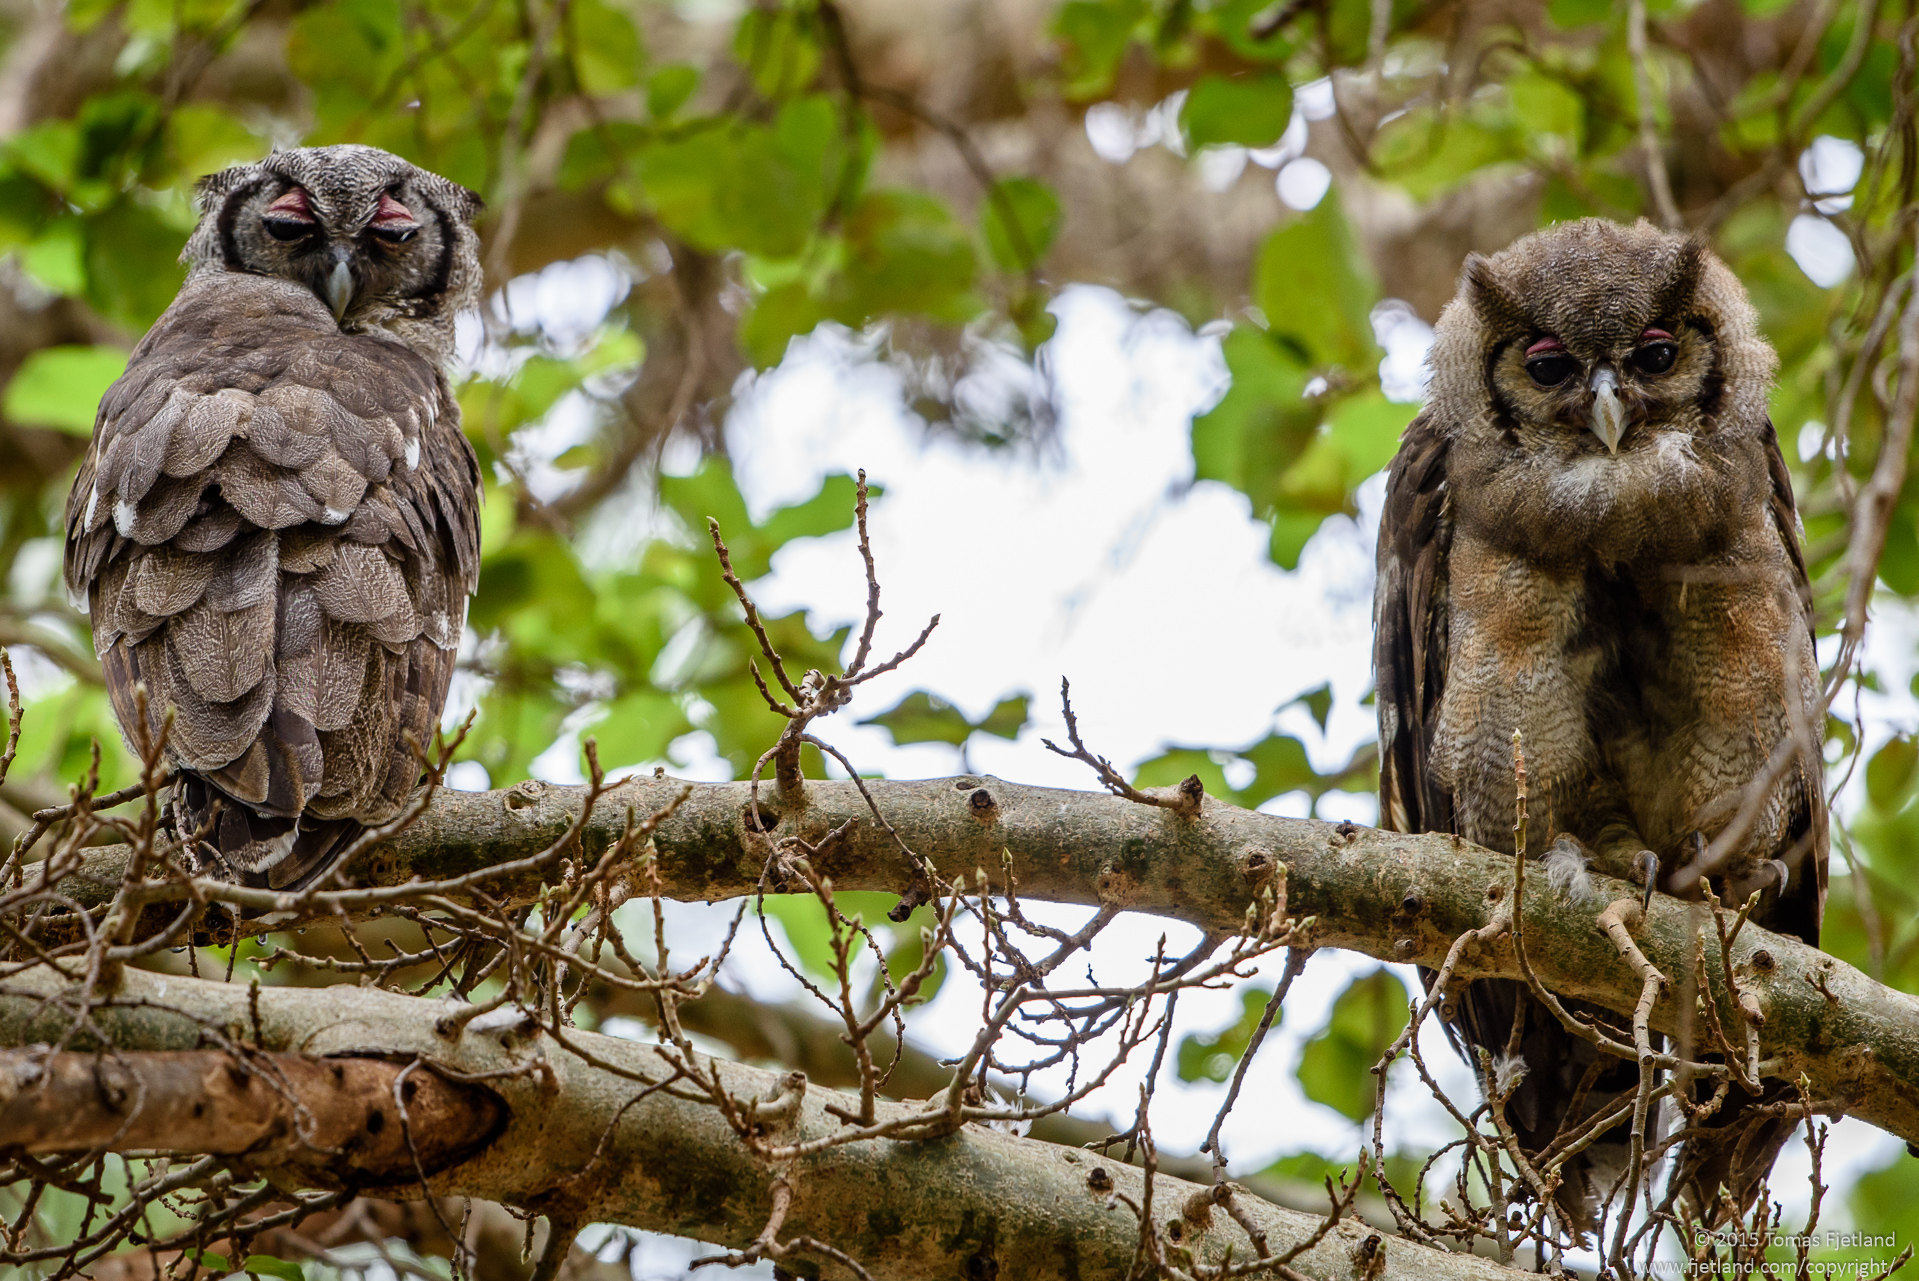 This pair of Verreaux's Eagle-Owls were sitting in a tree right above my tent inside Larsens camp. You could easily spend a whole day shooting birds just inside of Larsens camp, it's so full of beautiful species